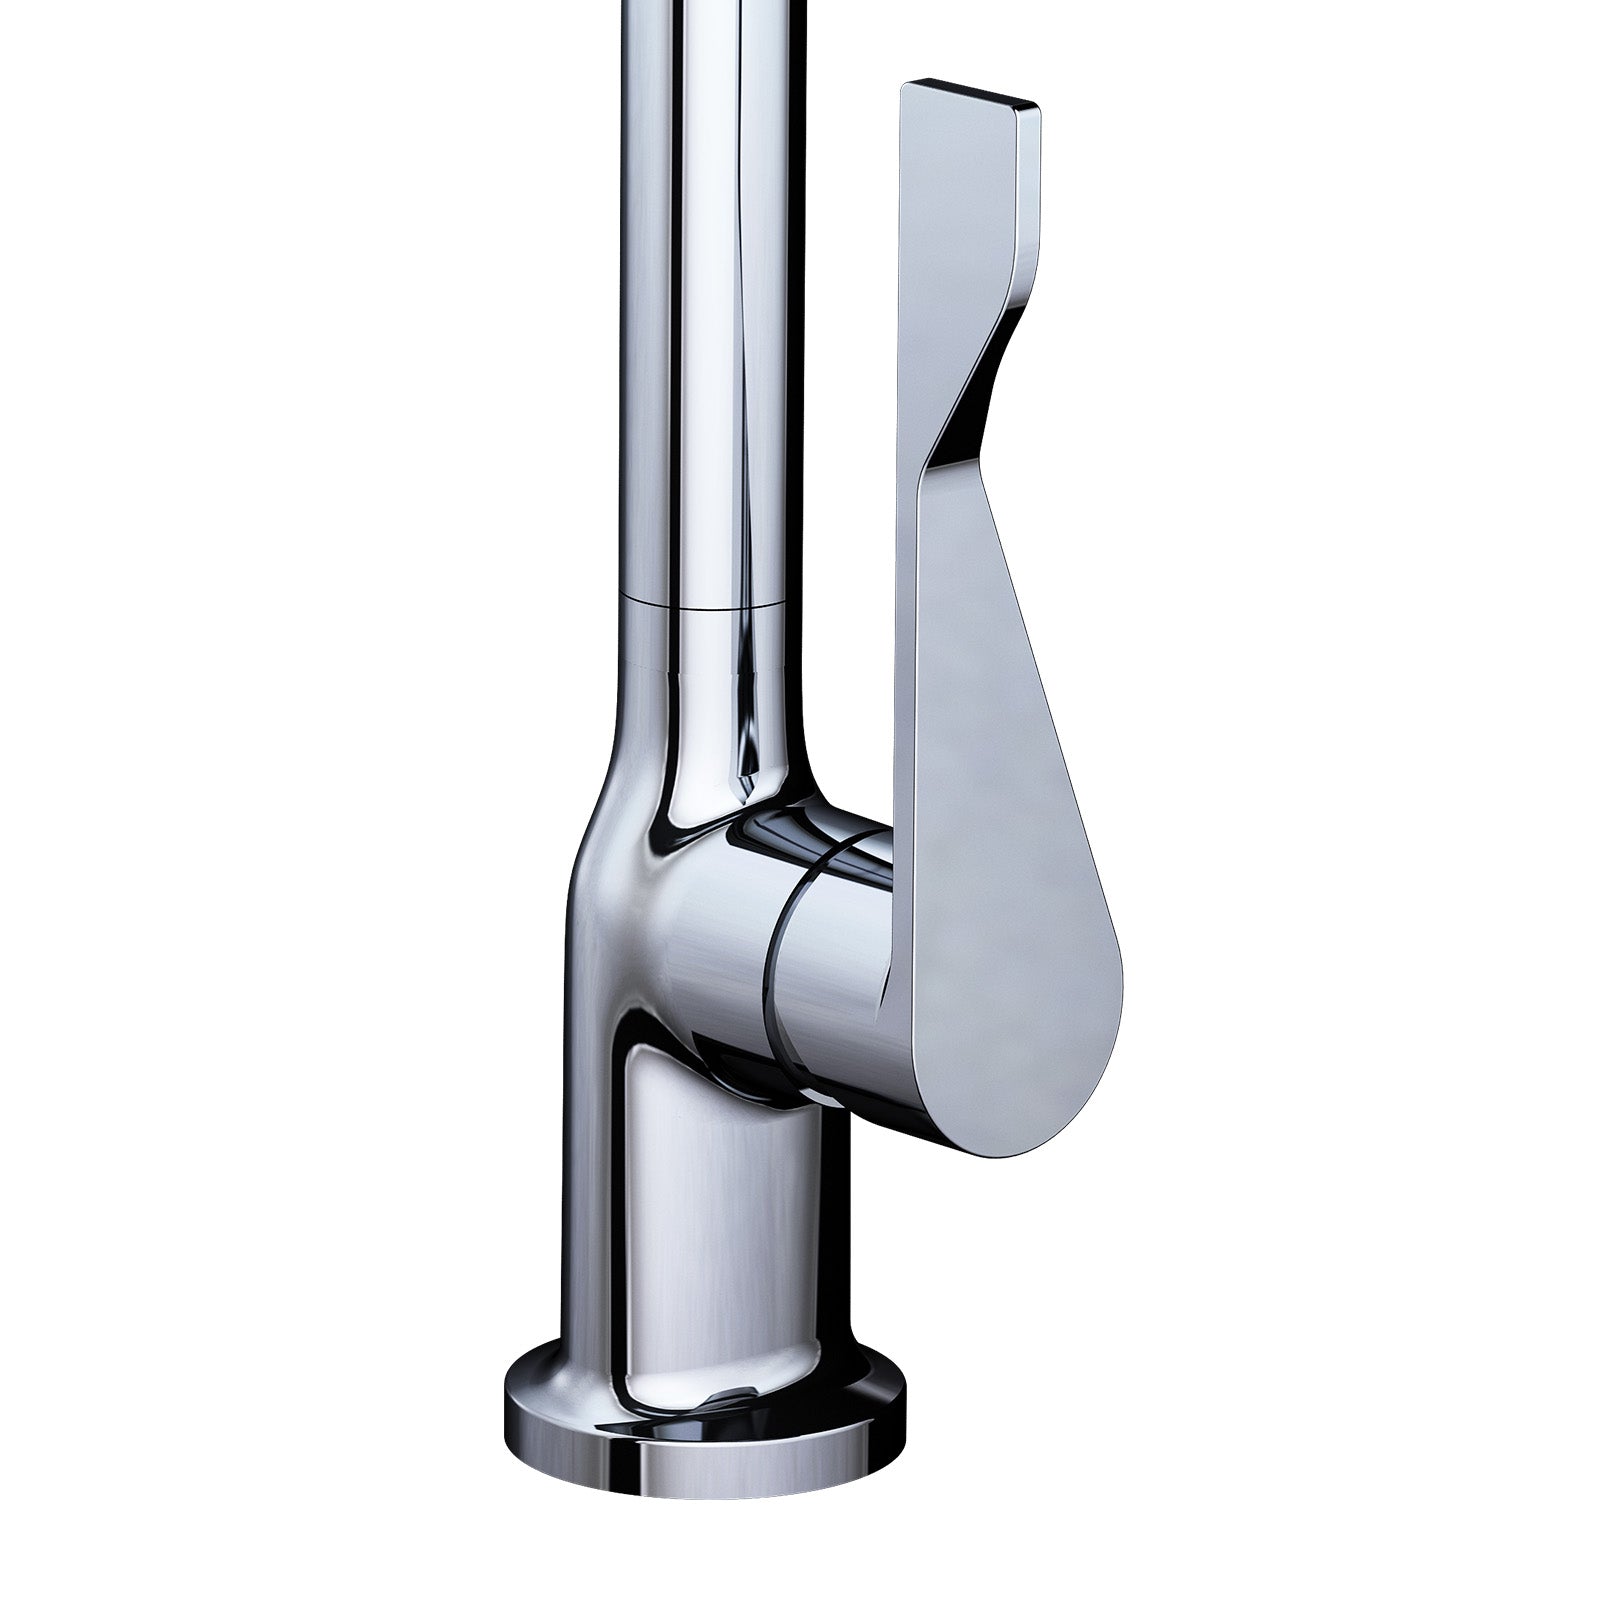 Modern Design Chrome Kitchen Sink Single Lever Mixer Tap With Swivel Spout